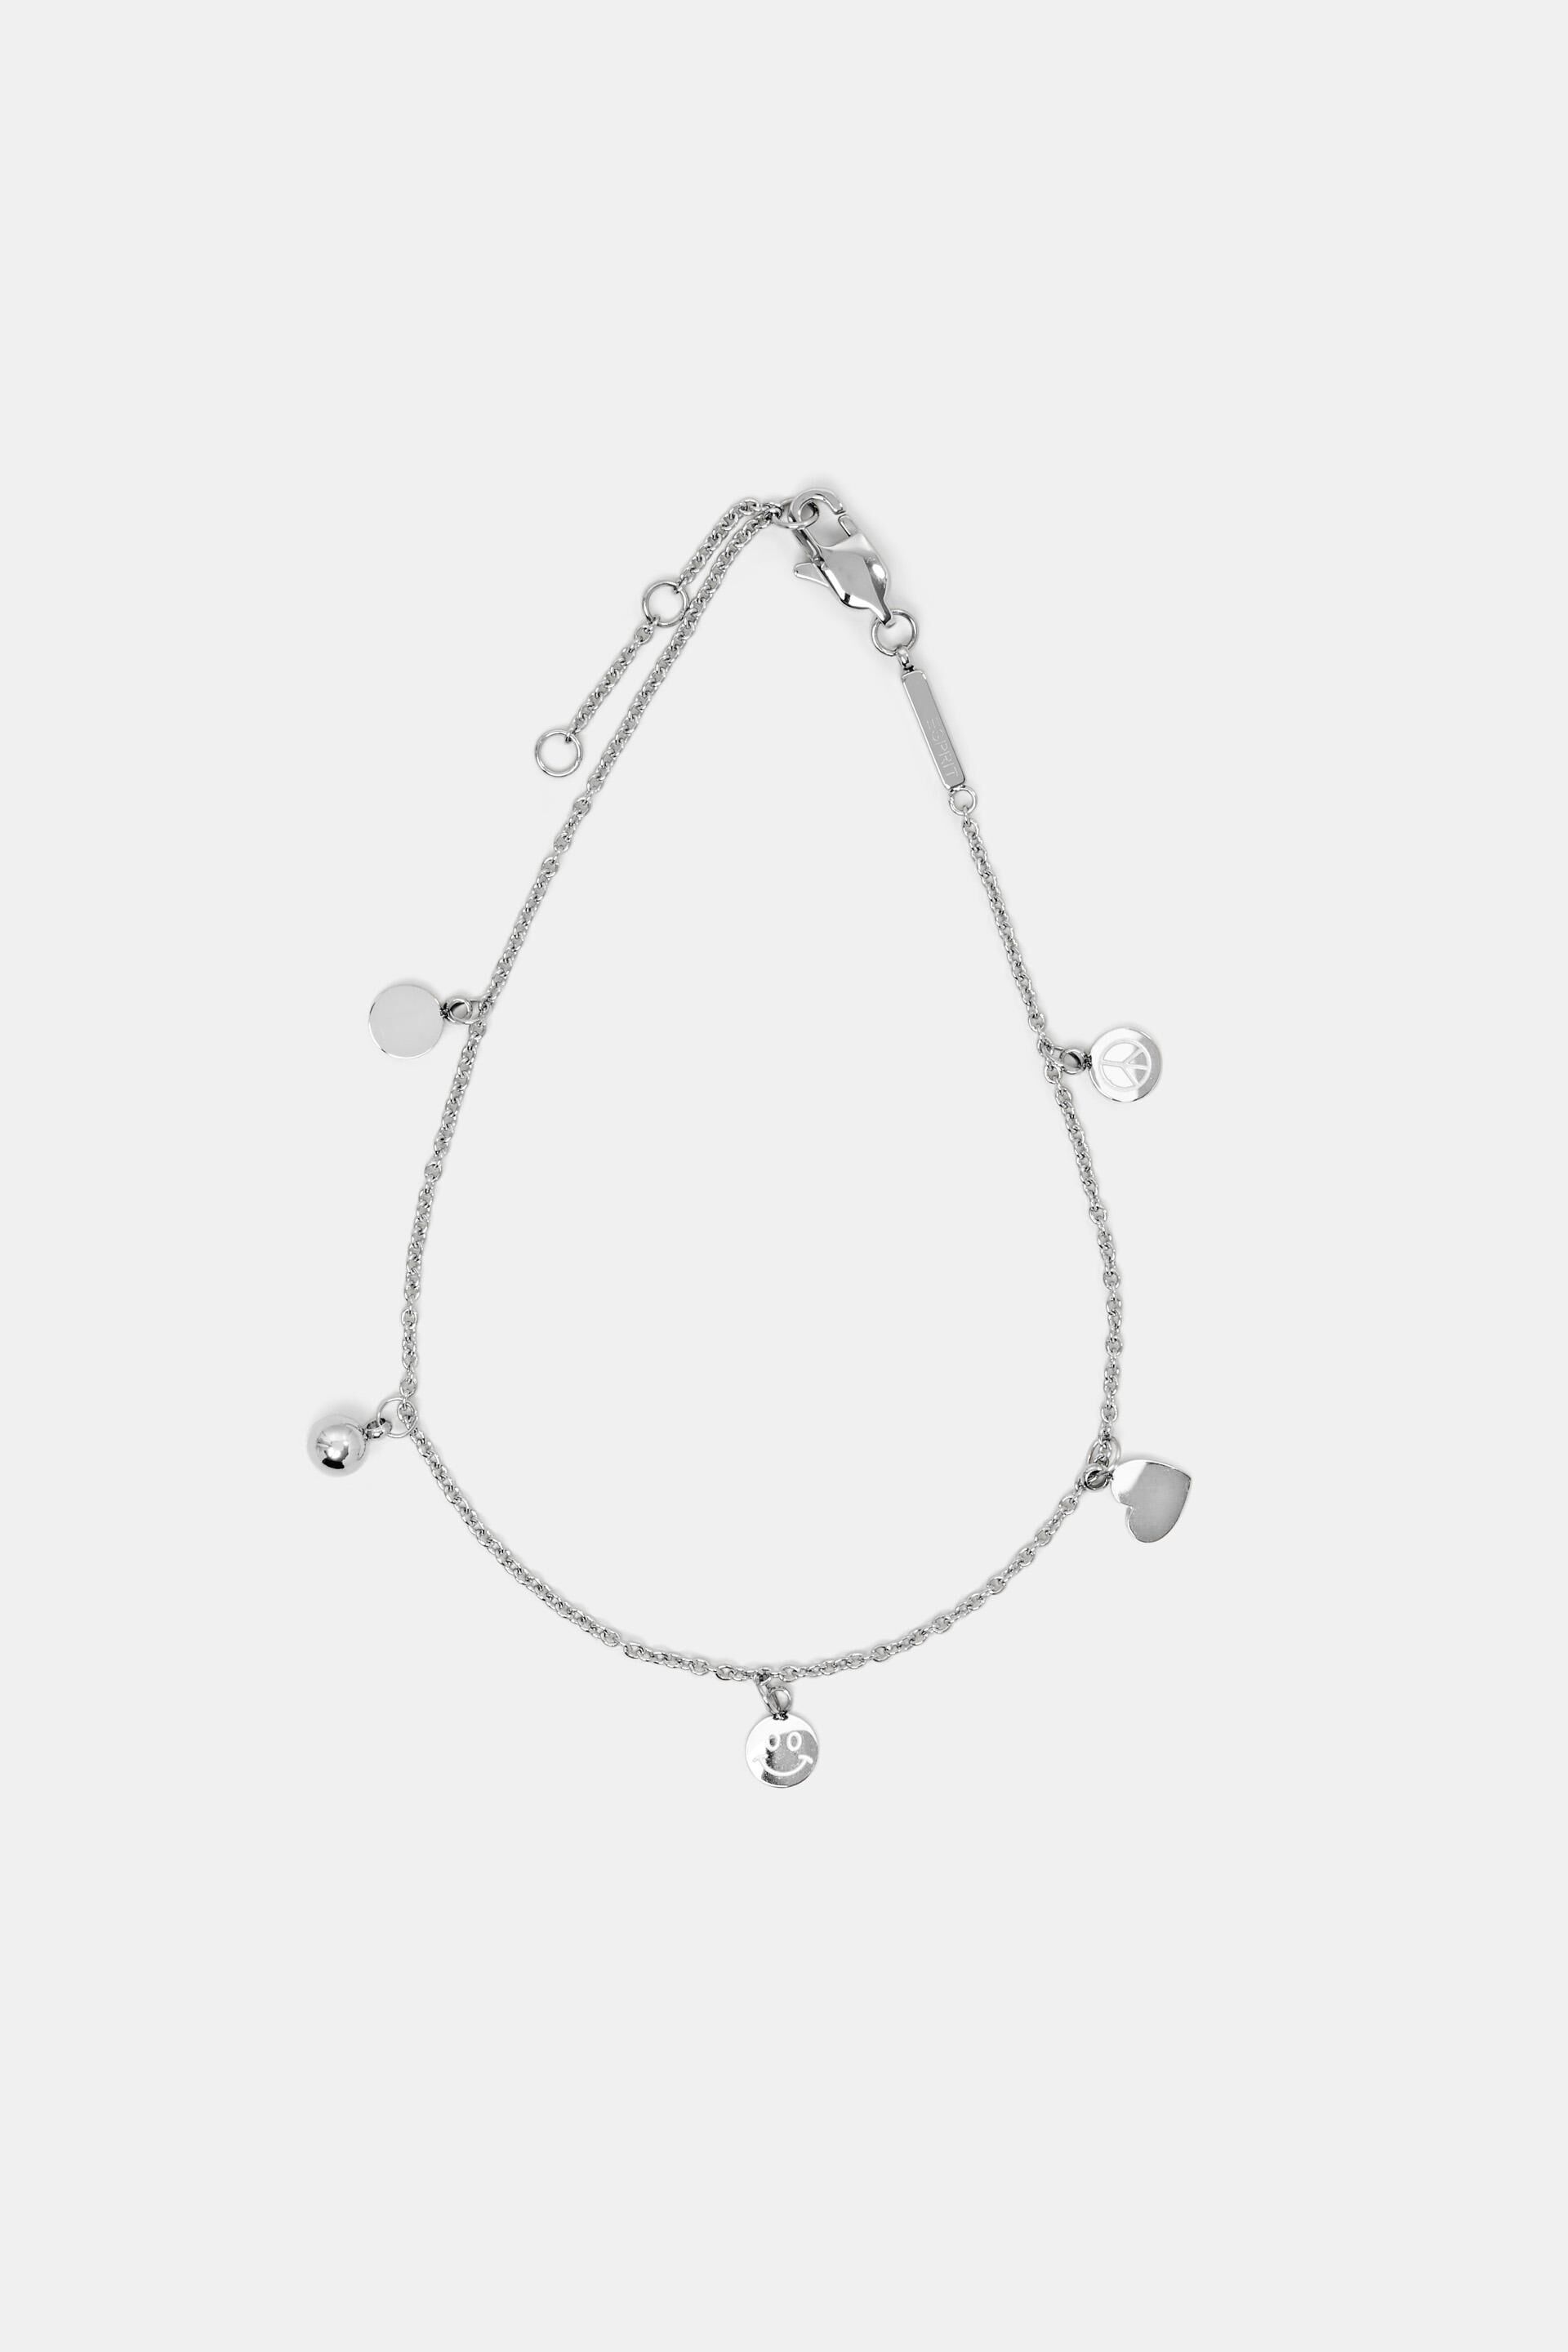 Esprit Lucky steel charms stainless anklet,